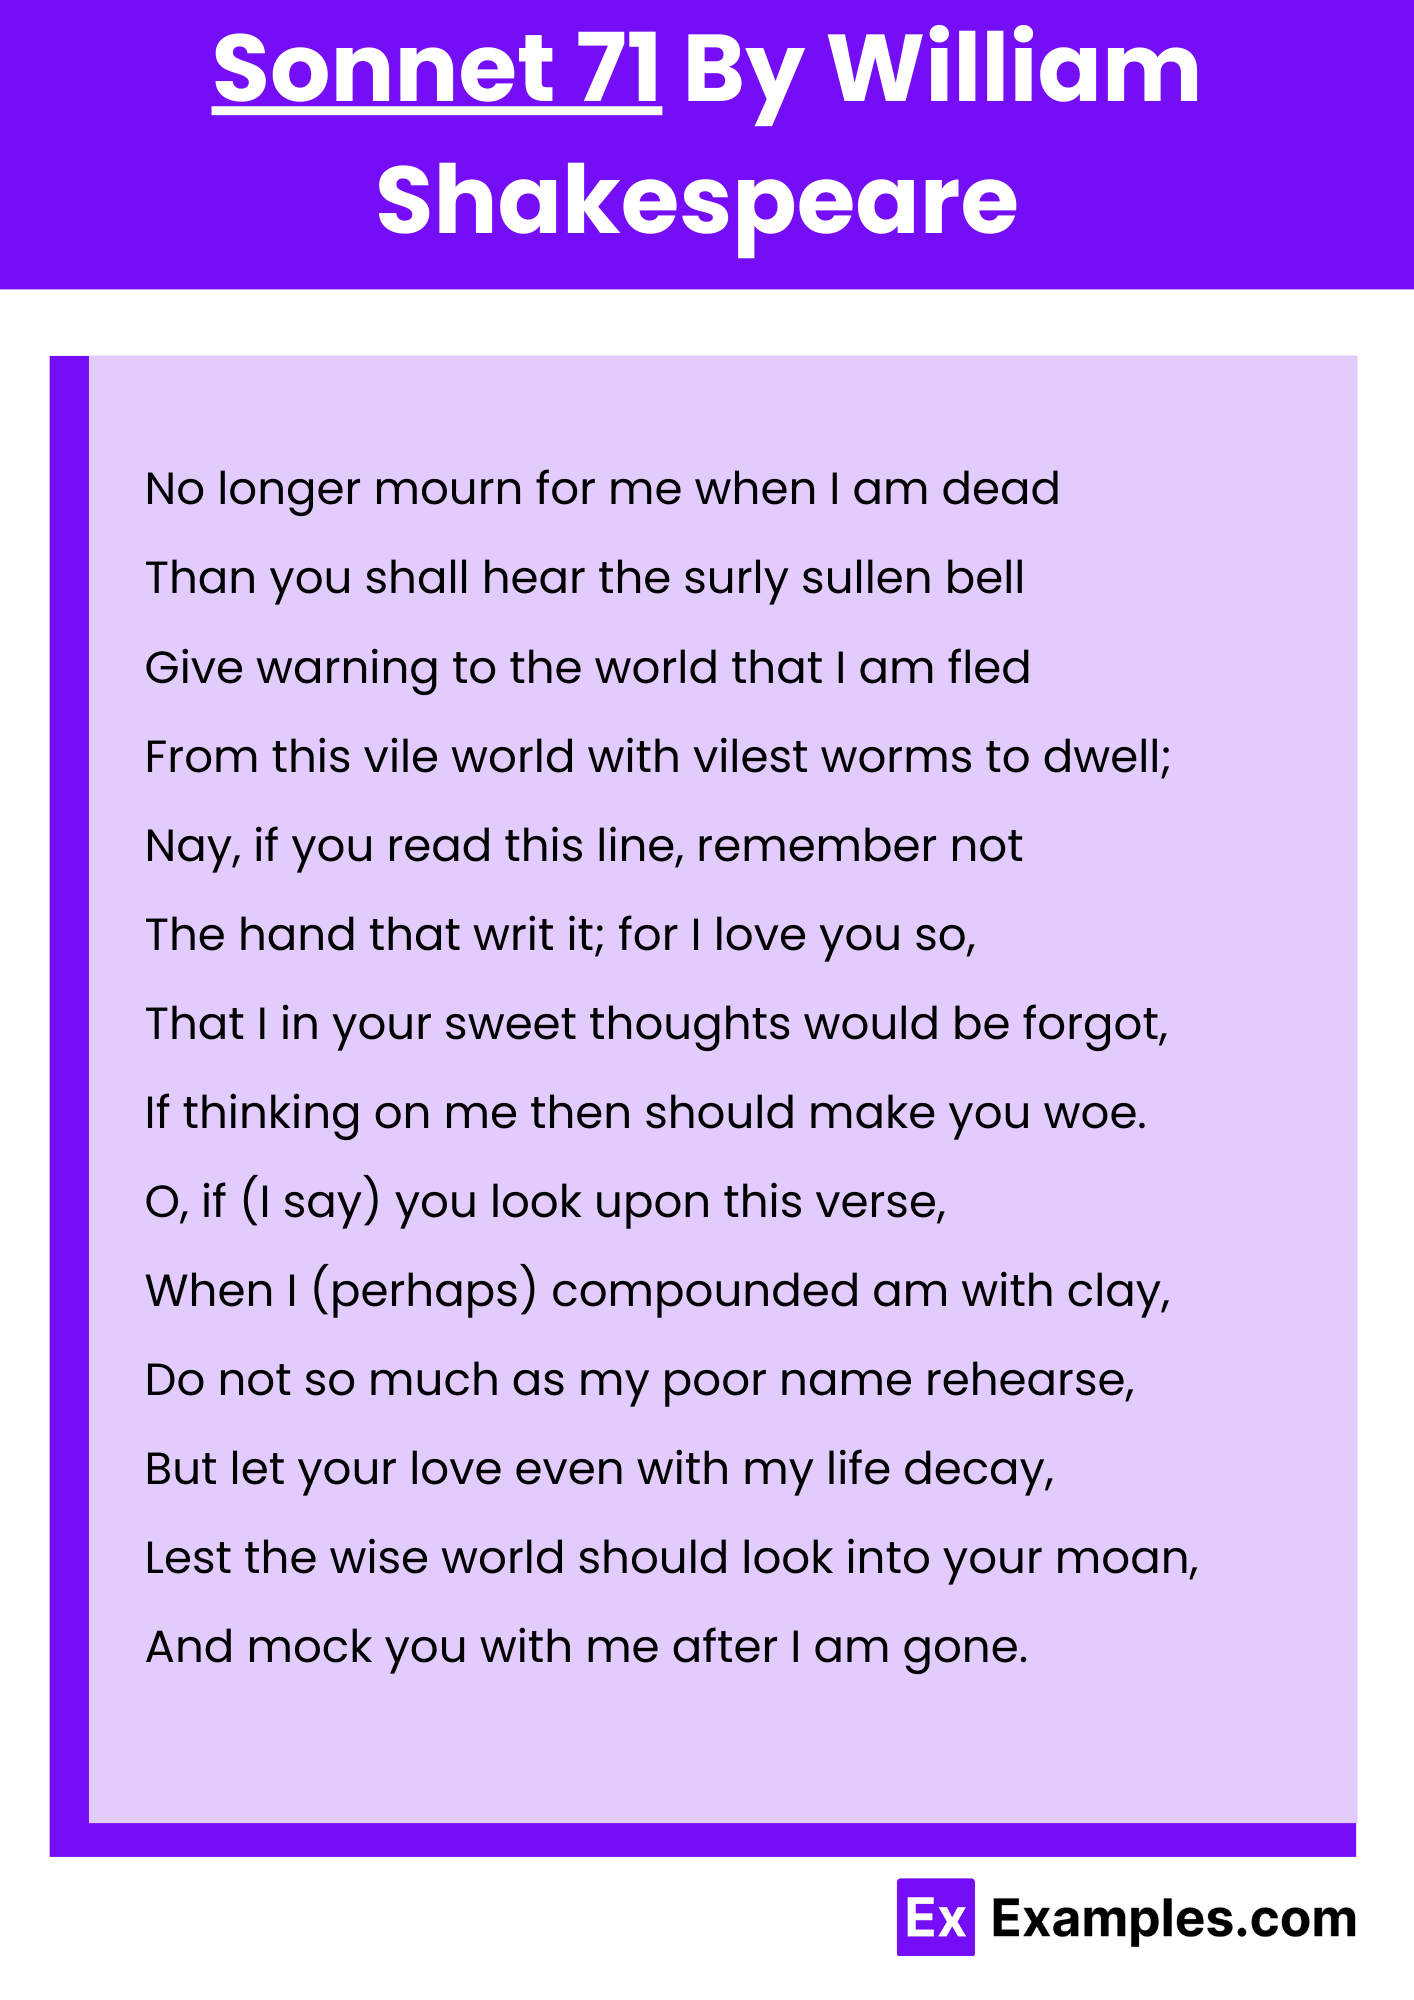 Sonnet 71 By William Shakespeare